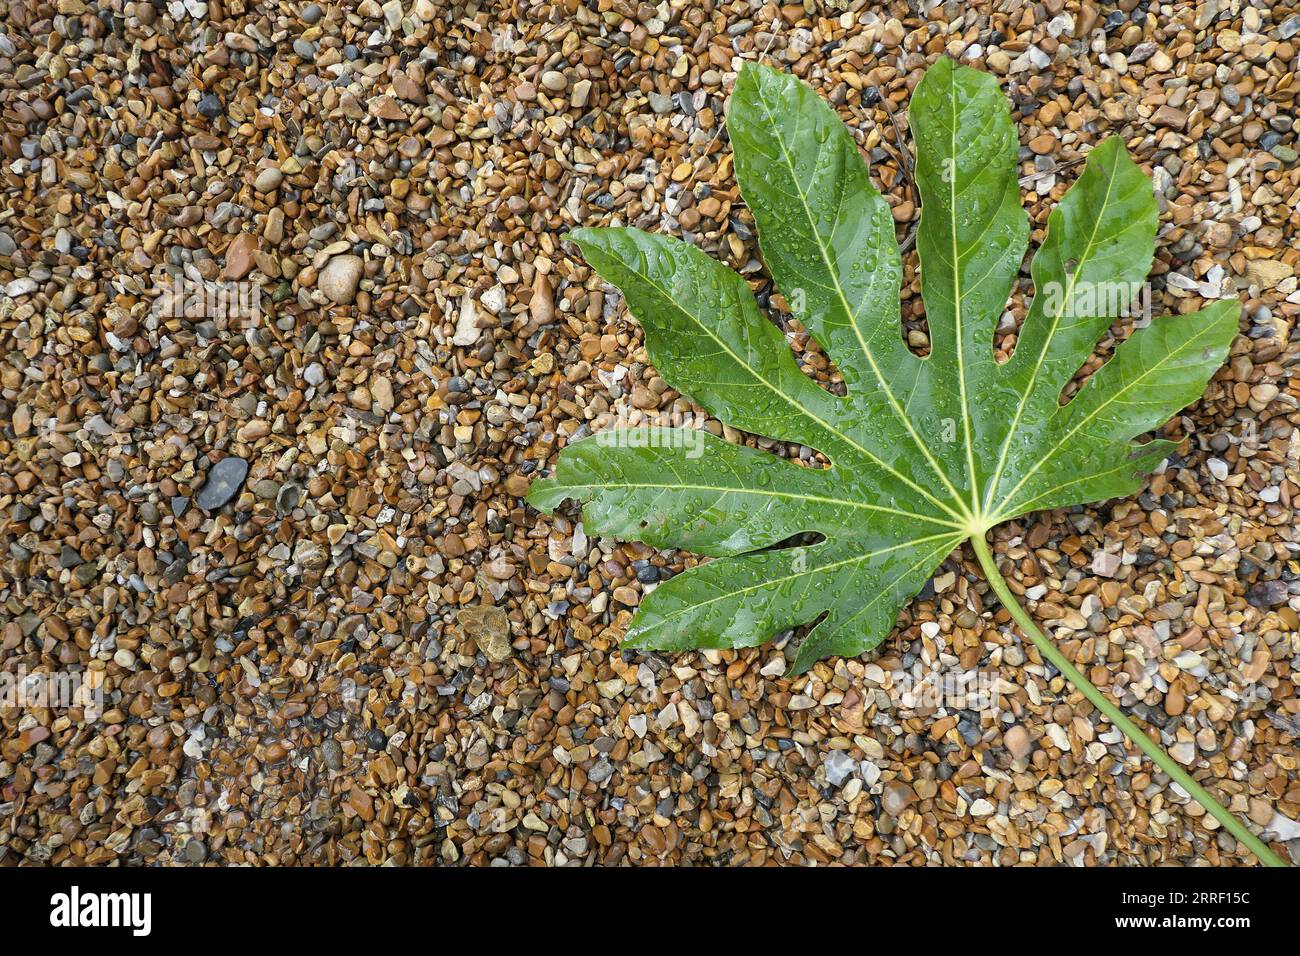 Closeup of an exotic green fallen leaf of the evergreen garden plant Fatsia japonica or Caster Oil plant. Stock Photo